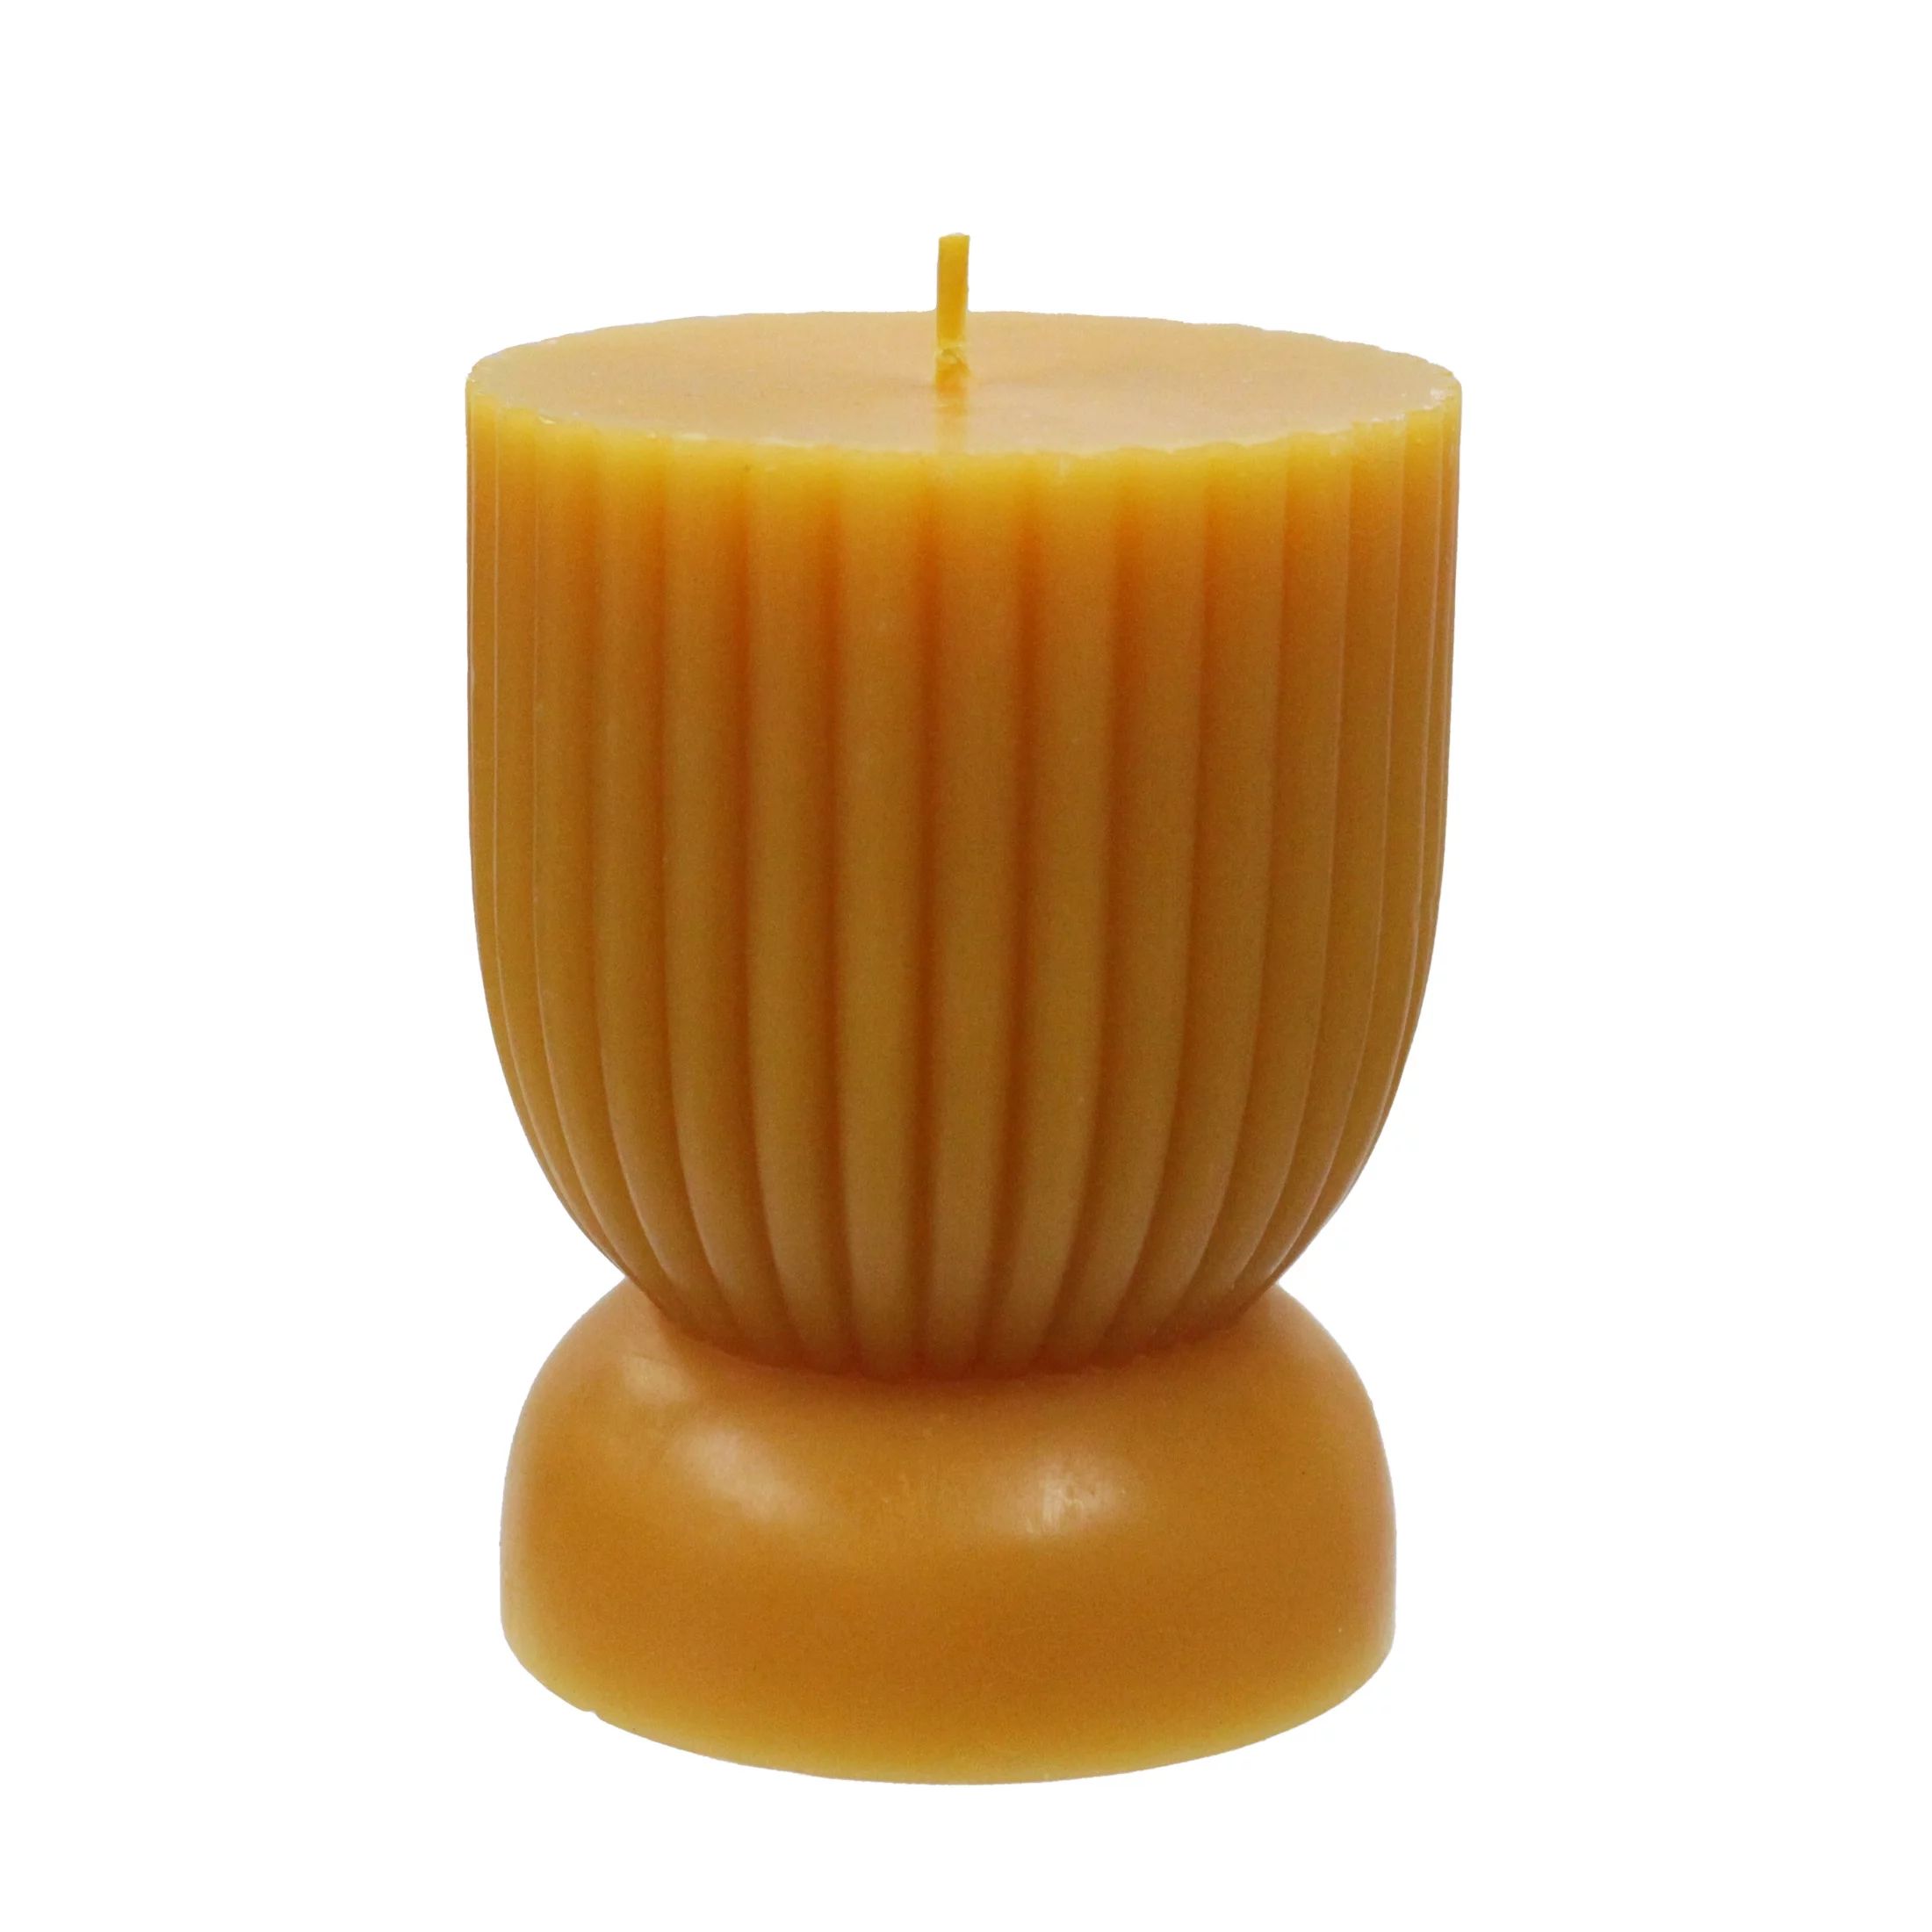 Better Homes & Gardens Unscented Ribbed Pillar Candle, 3x4 inches, Orange | Walmart (US)